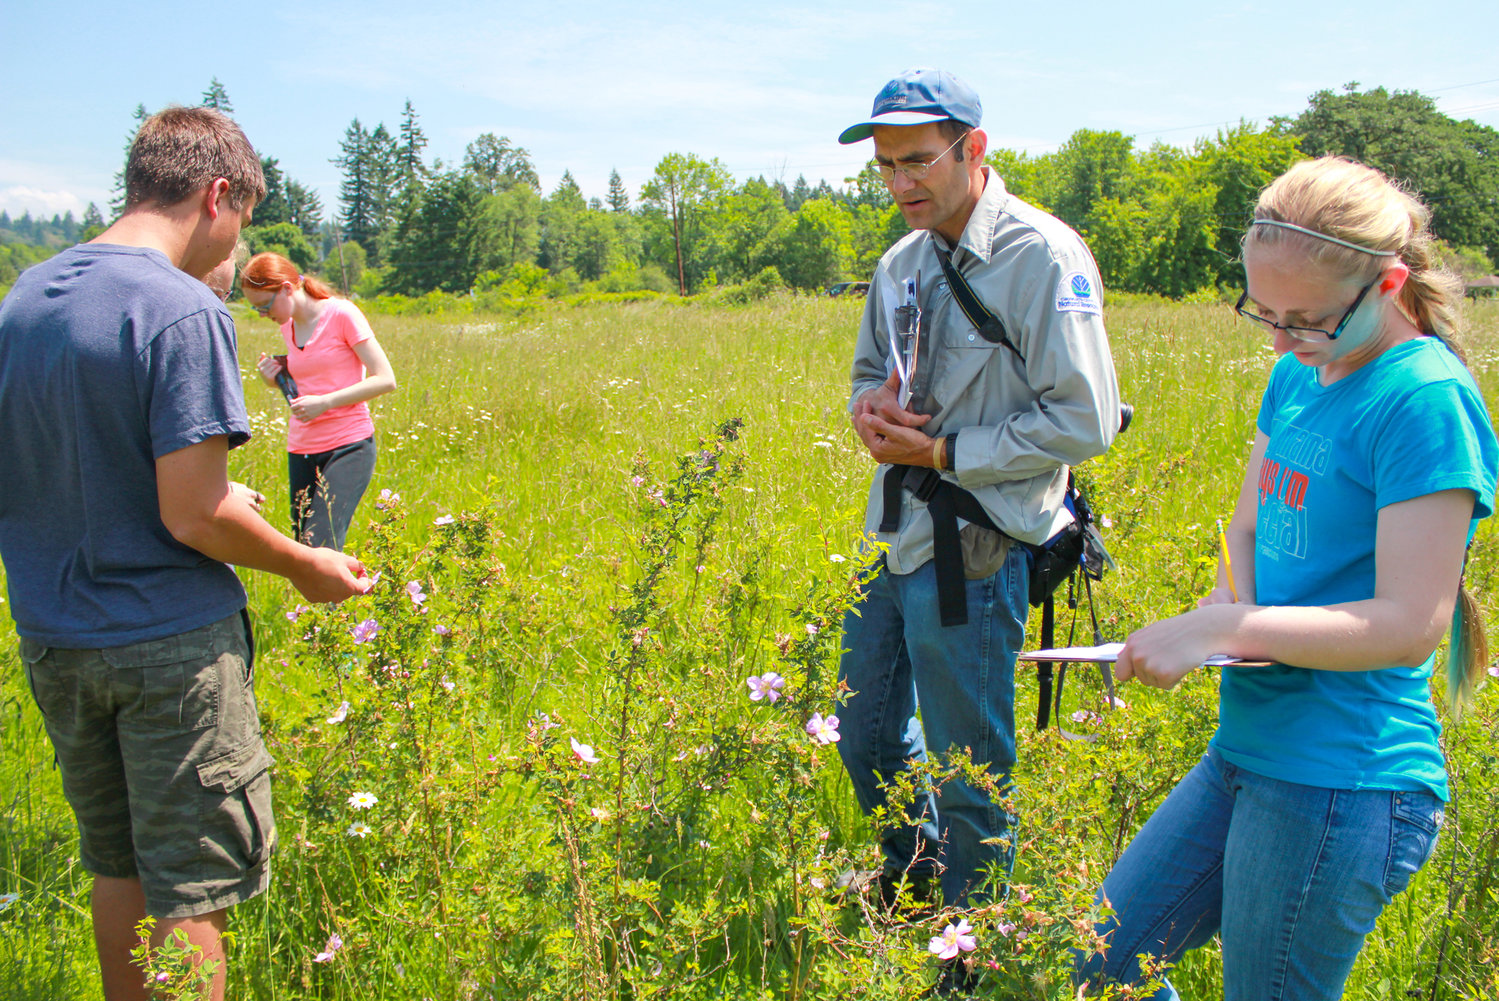 CASEE STUDENTS are shown here recording the number and types of pollinators that use the flowers in the Lacamas Prairie Natural Area. CASEE is one of the Battle Ground School District’s Career and Technical Education (CTE) programs. 